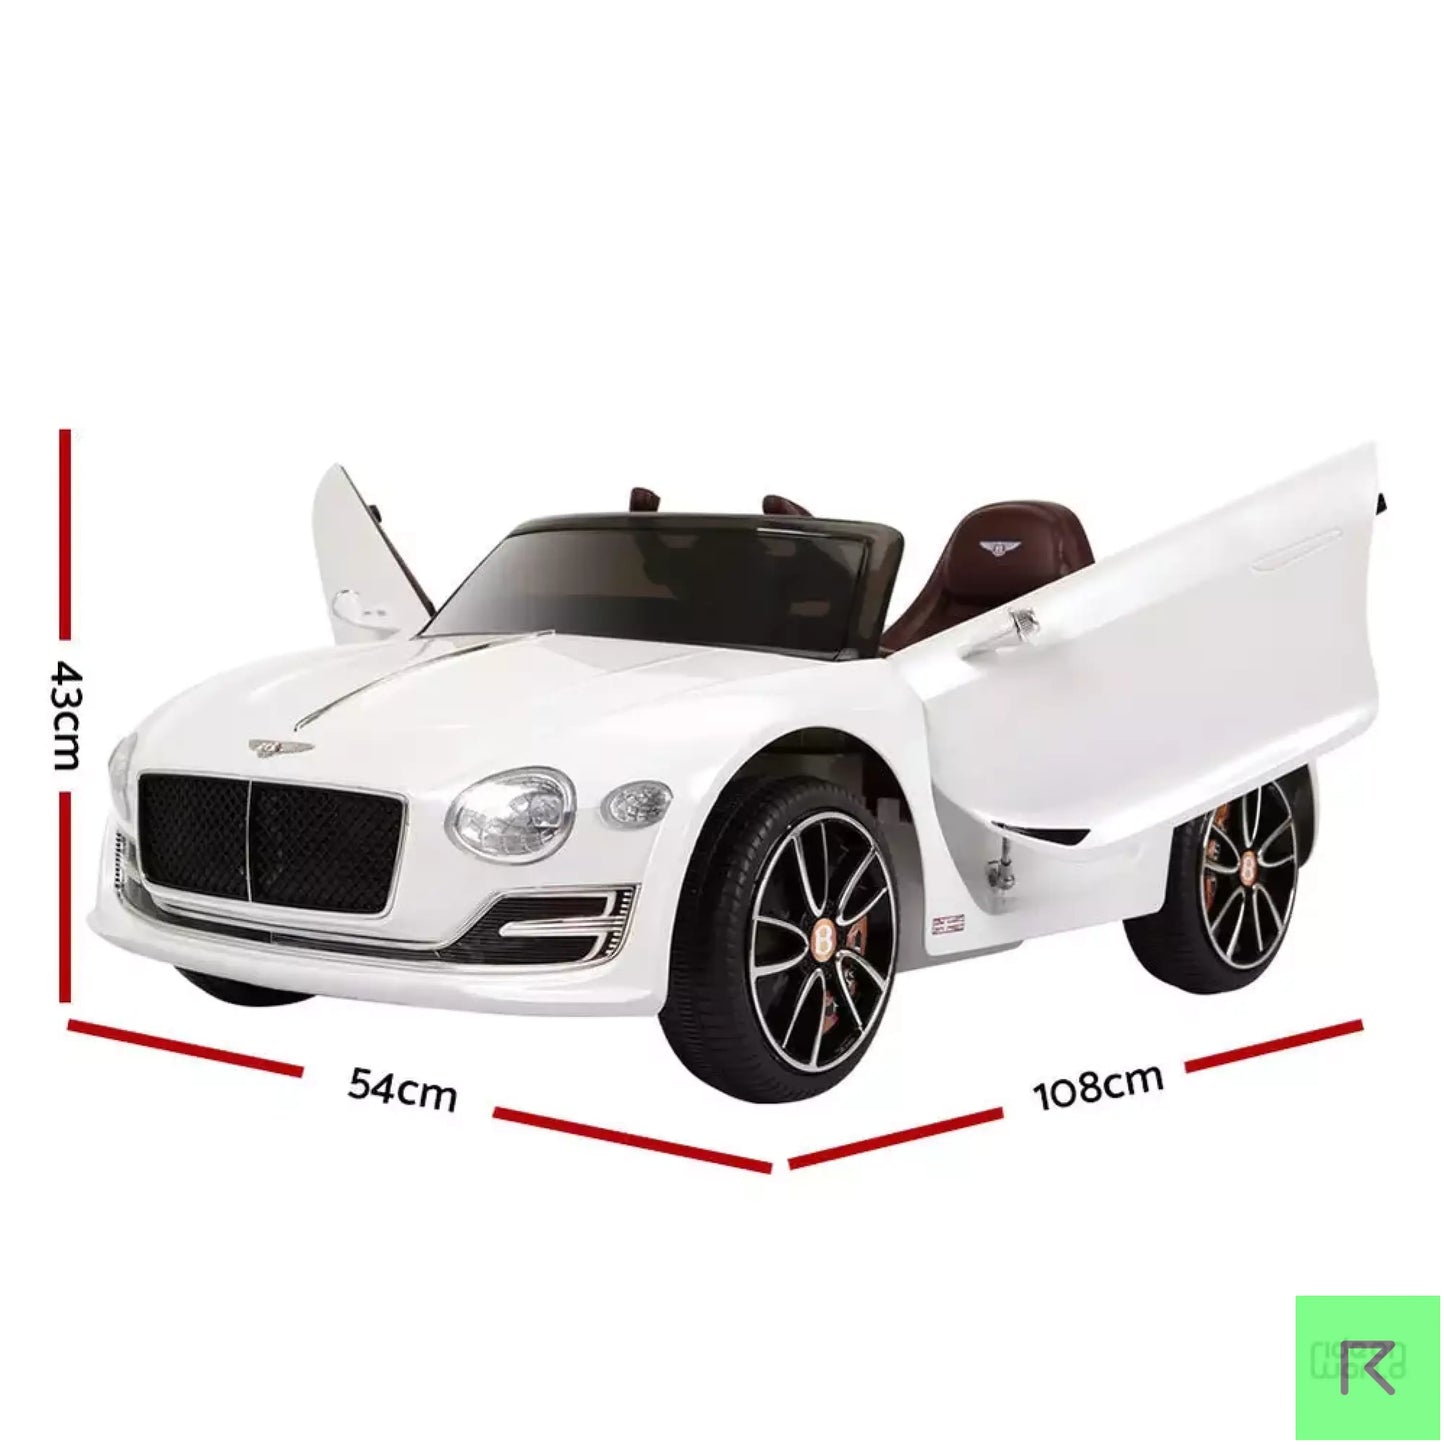 BENTLEY 6E WHITE LICENSED KIDS ELECTRIC RIDE ON CAR